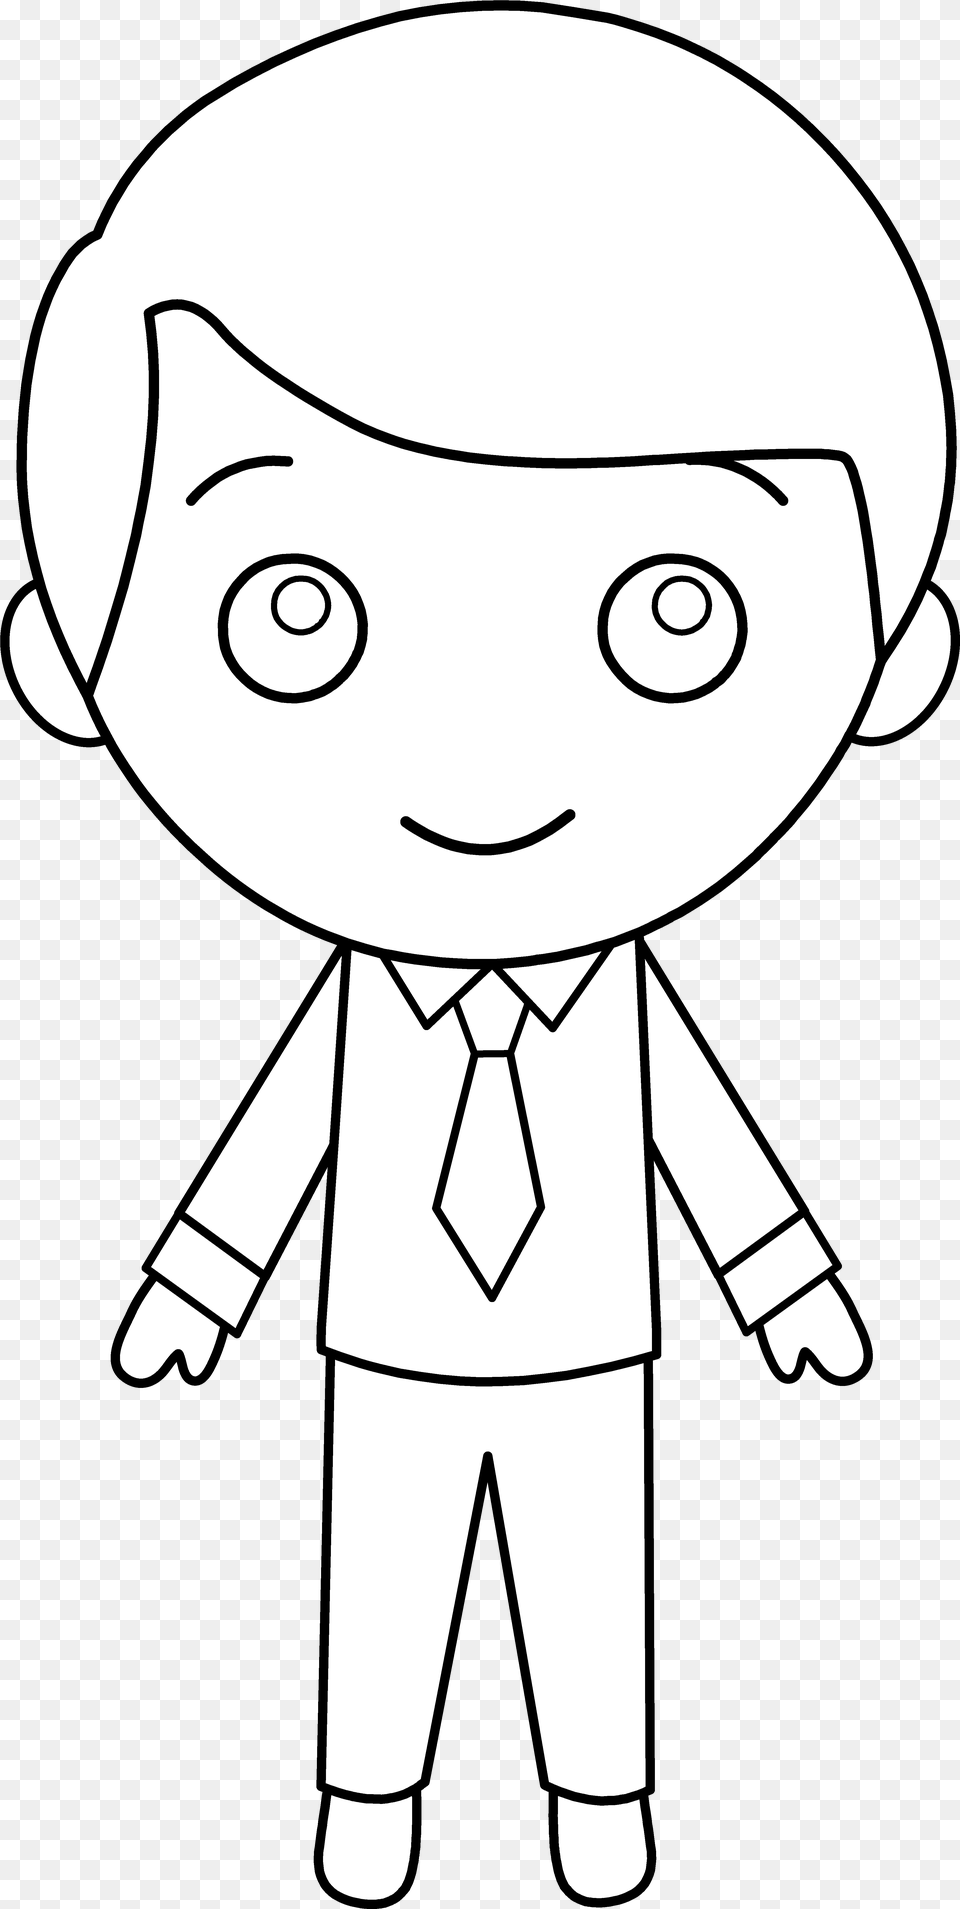 Download Hd Little Guy In Suit Line Art Black And White Boy Cartoon Black Background, Book, Comics, Publication, Baby Png